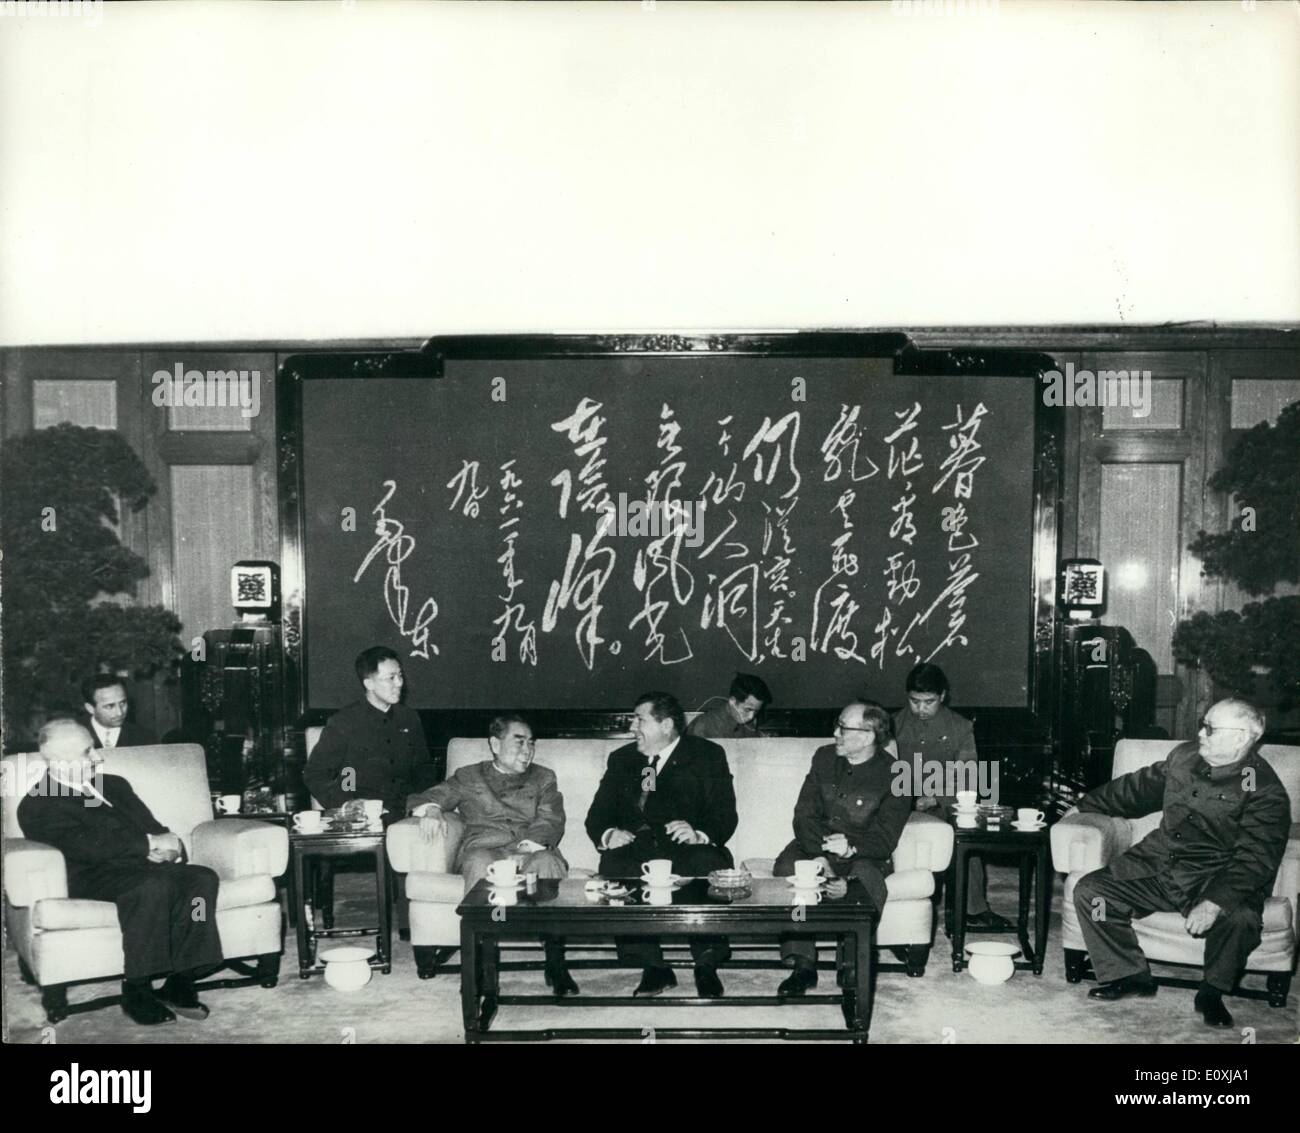 Jan. 19, 1967 - 19-1-67 Beneath a poem by Mao Tse Tung. This picture was taken on January 14 at Peking. Chou En Lai, who appears in the best of humour, receives an Albanian military delegation. Behind him a large blackboard on which a poem composed by Mao Tse Tung is written in his own handwriting. Photo Shows: Chou En Lai sitting beneath the poem composed by Mao Tse Tung. Stock Photo